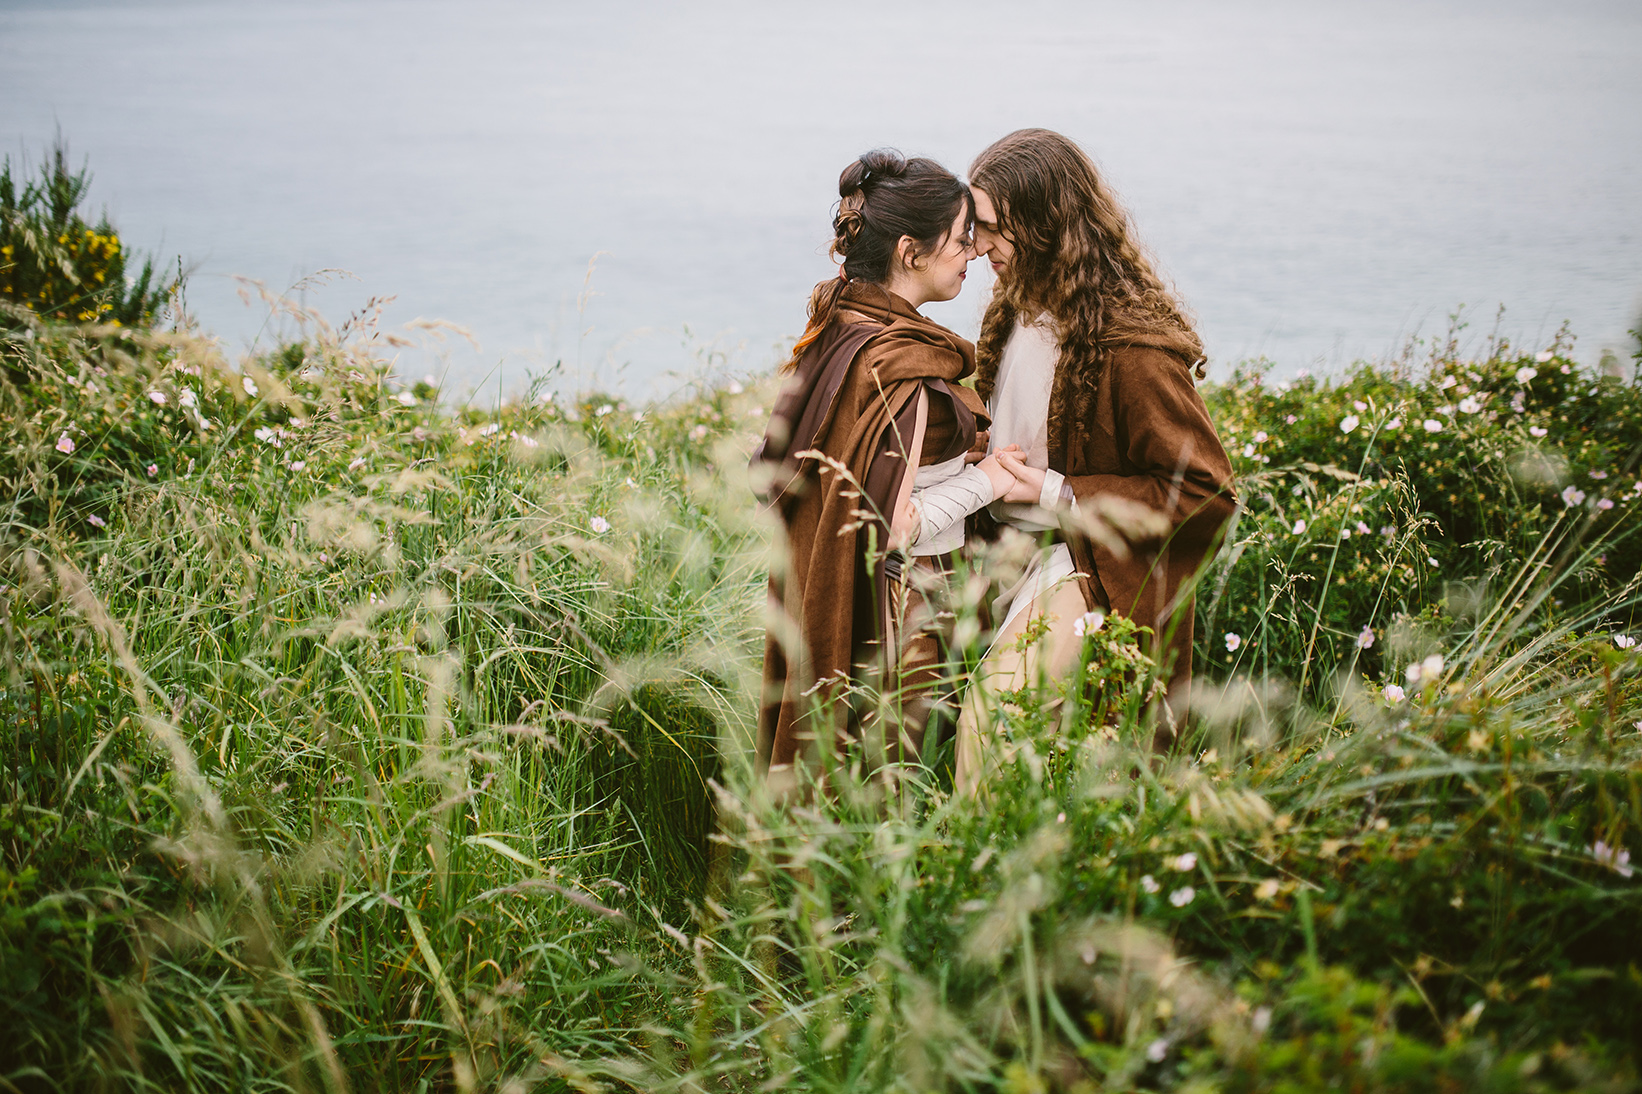 This Couple Got Their Engagement Photos Done Star Wars Style